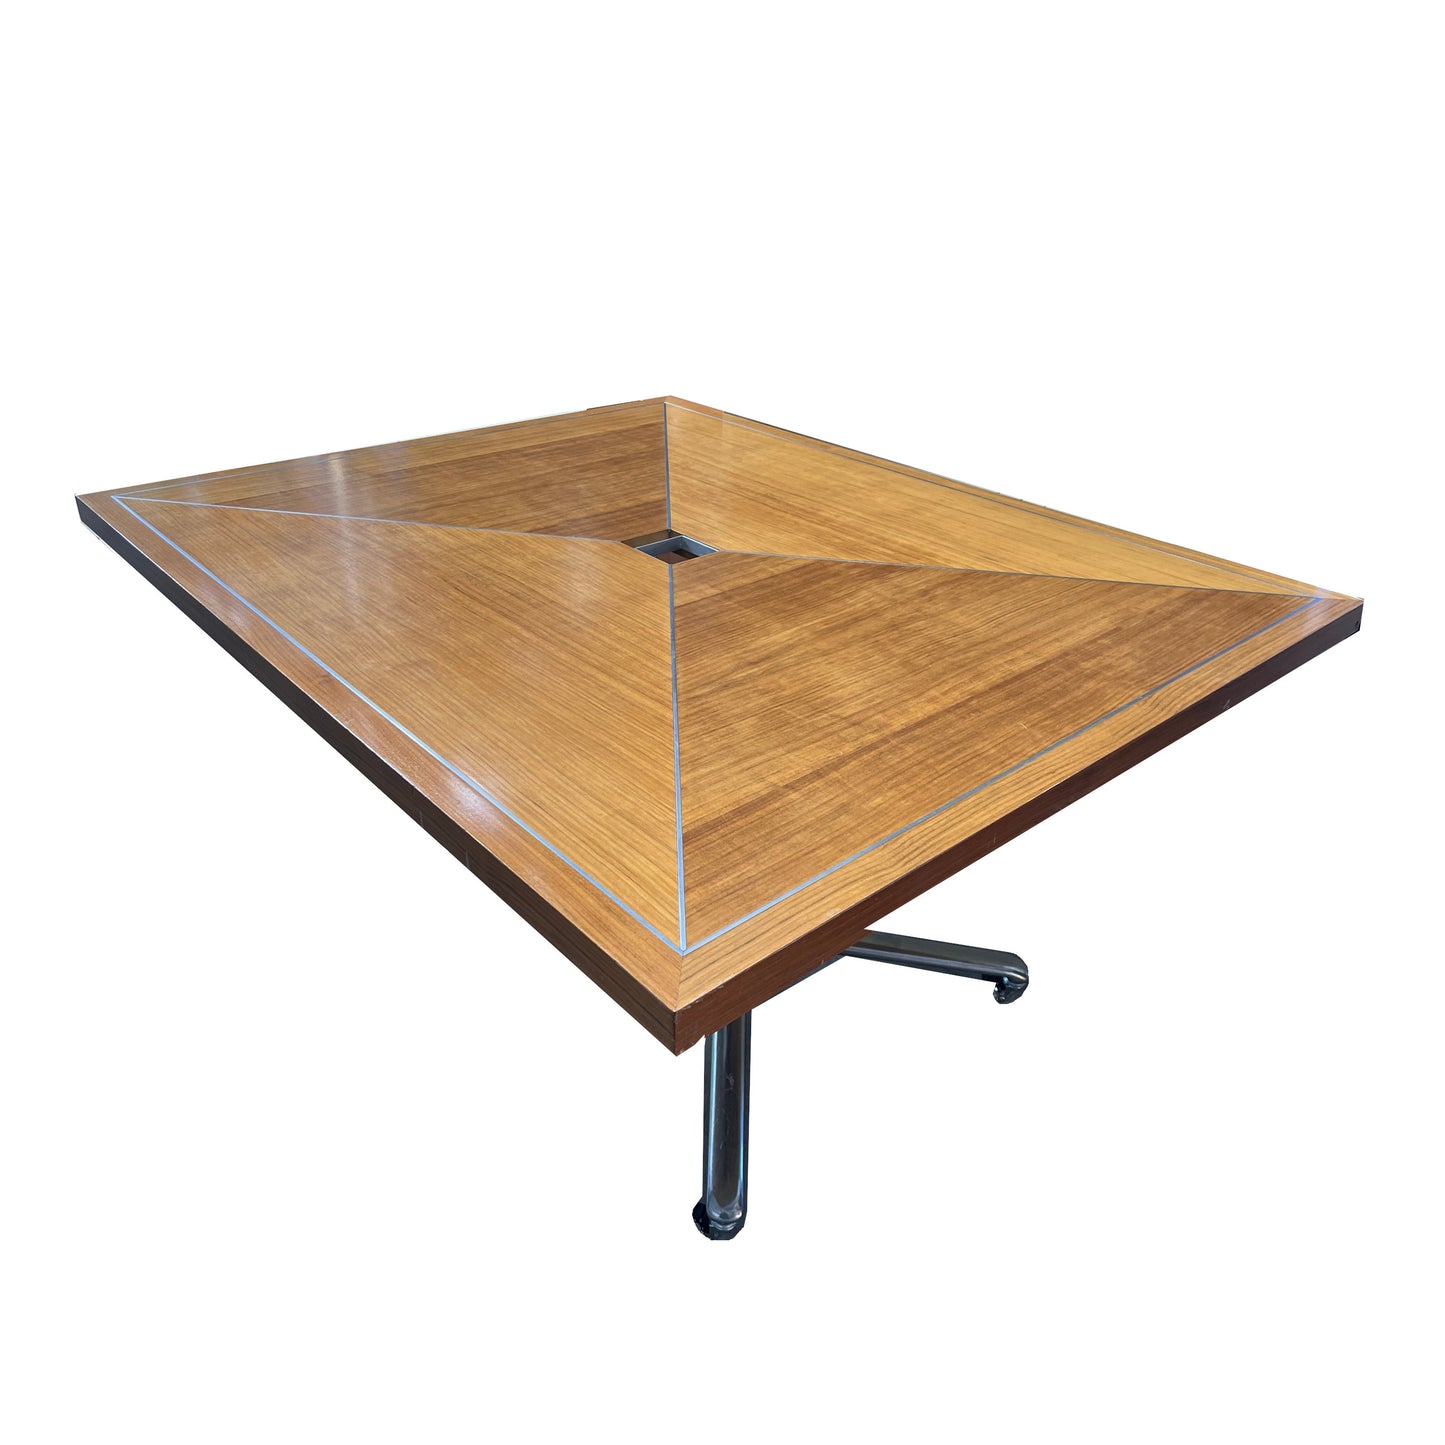 Wooden Meeting Table with Custom Silver Detailing